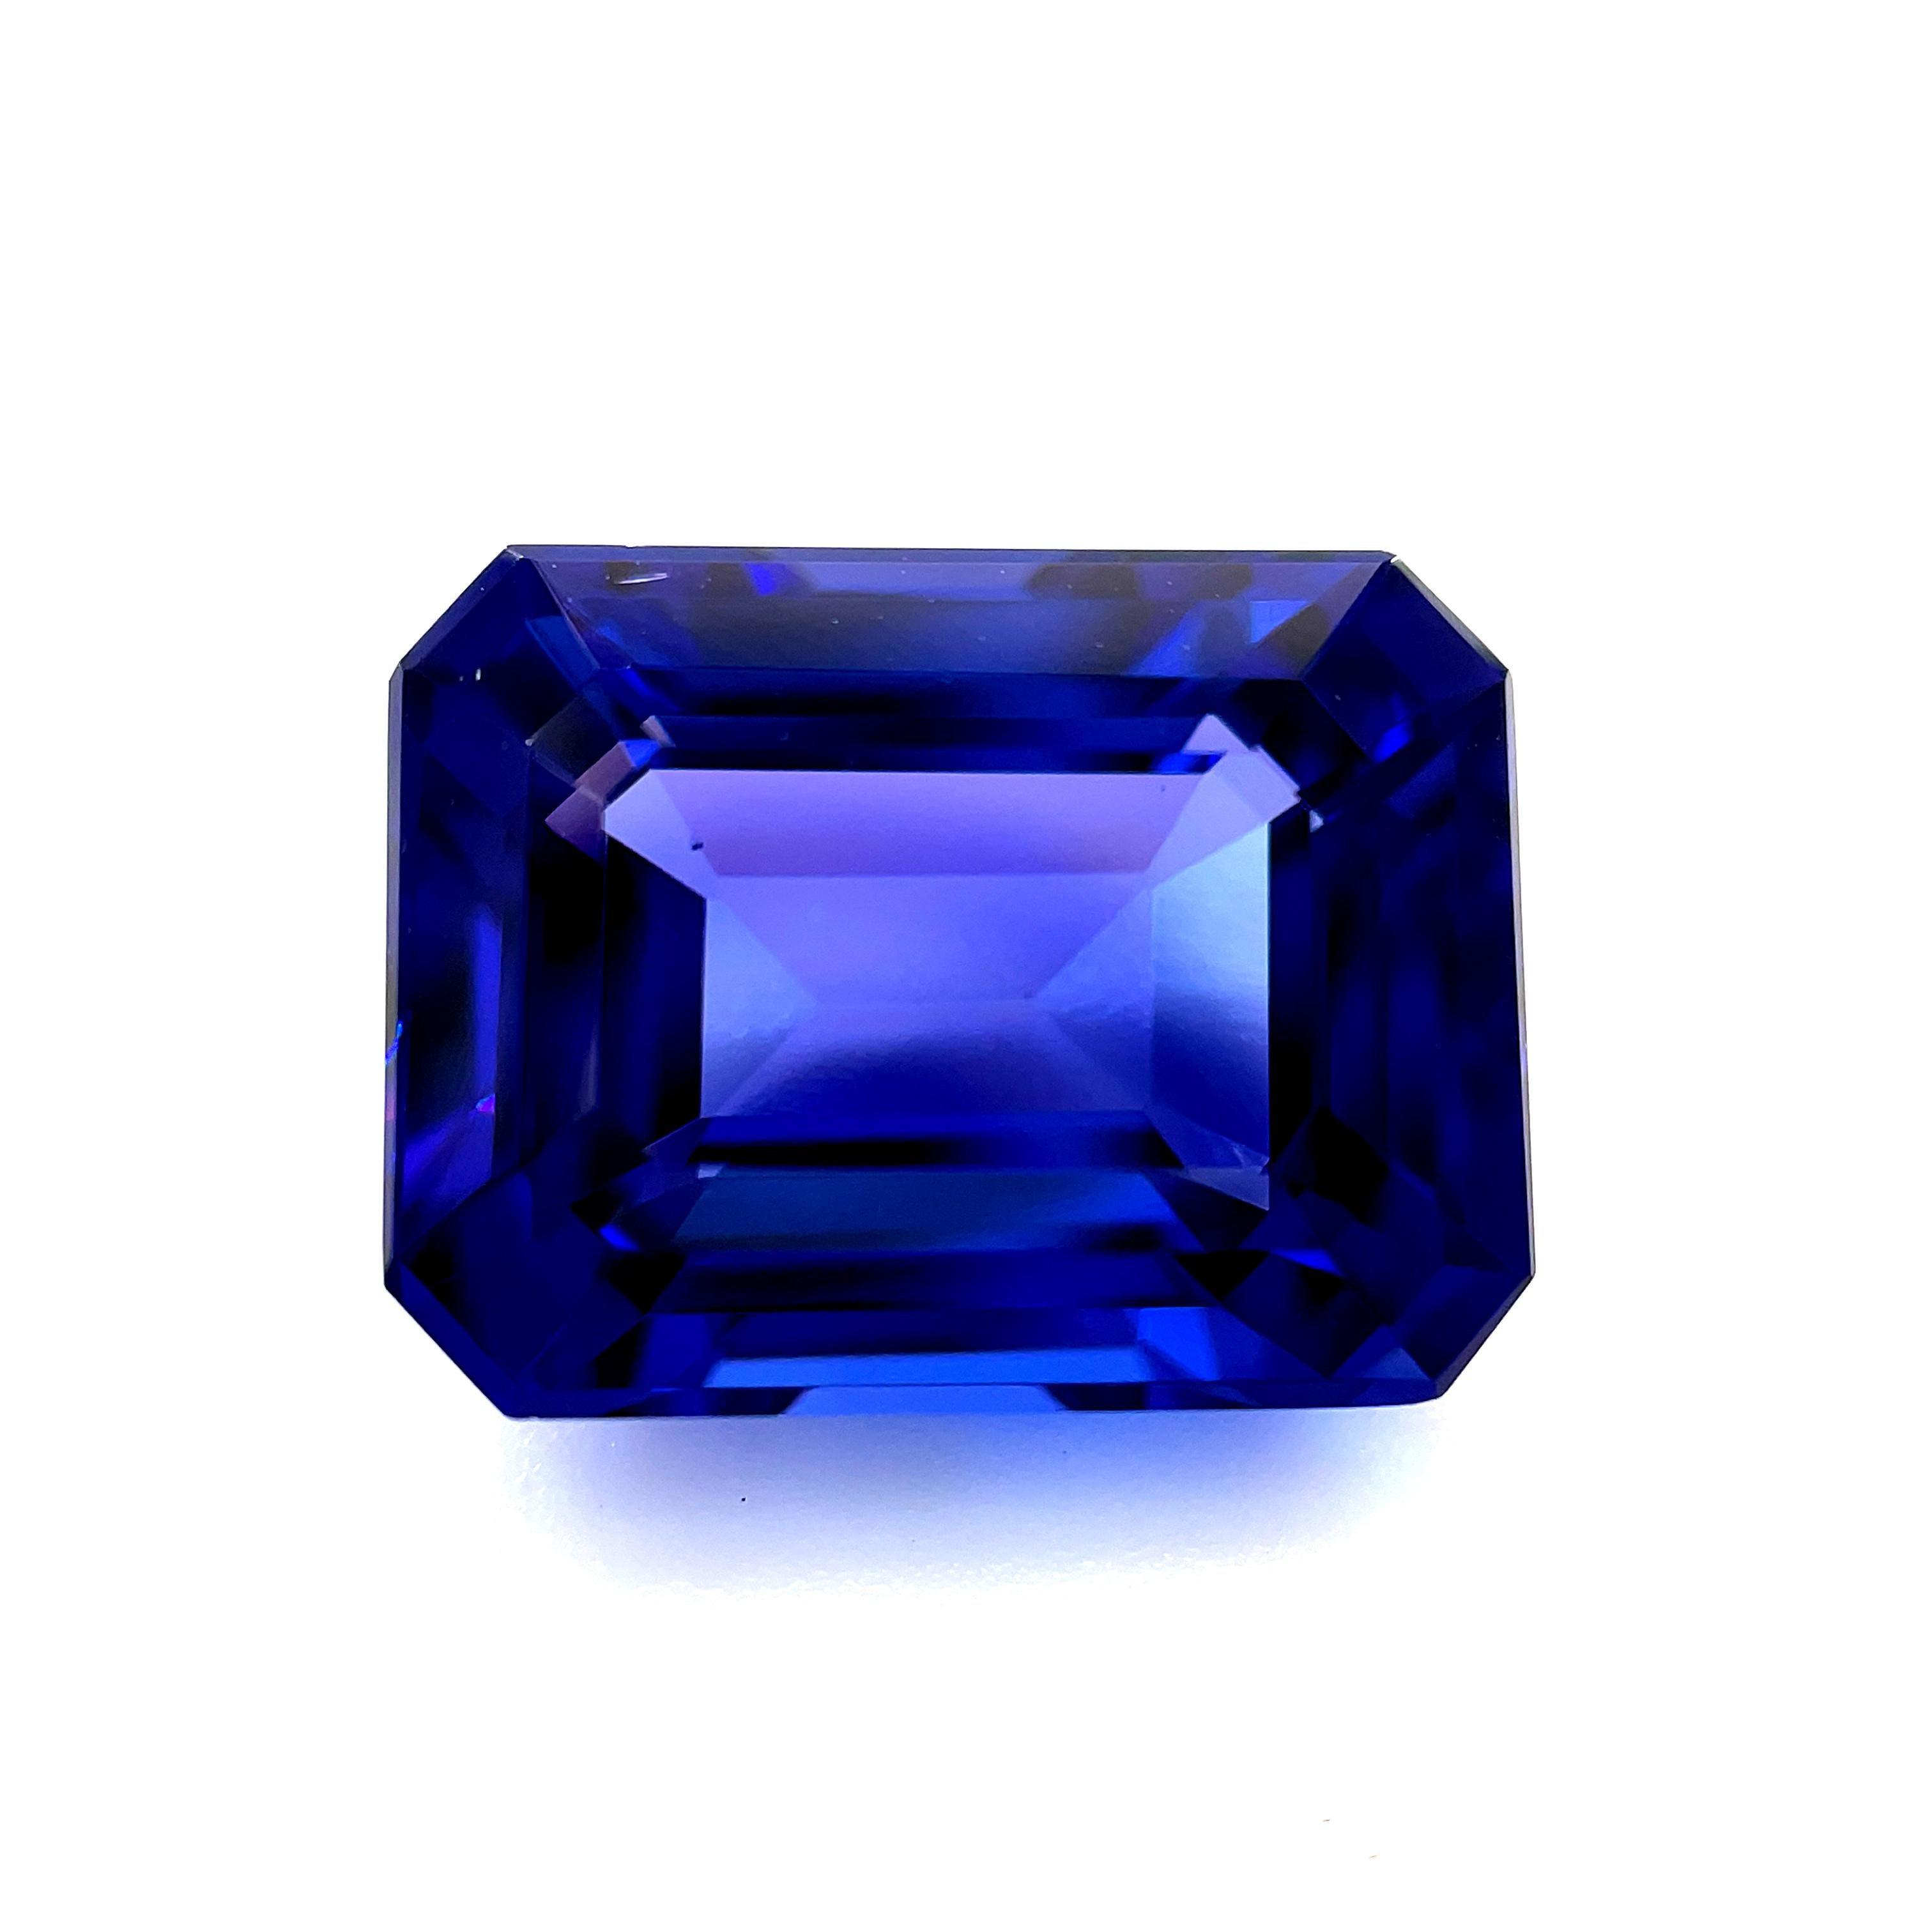 If there was ever a gemstone that could make you fall in love with emerald-cuts, this would be it. Weighing an impressive 9.91 carats, this extraordinarily fine tanzanite is absolutely spectacular. This gem has world-class tanzanite color -